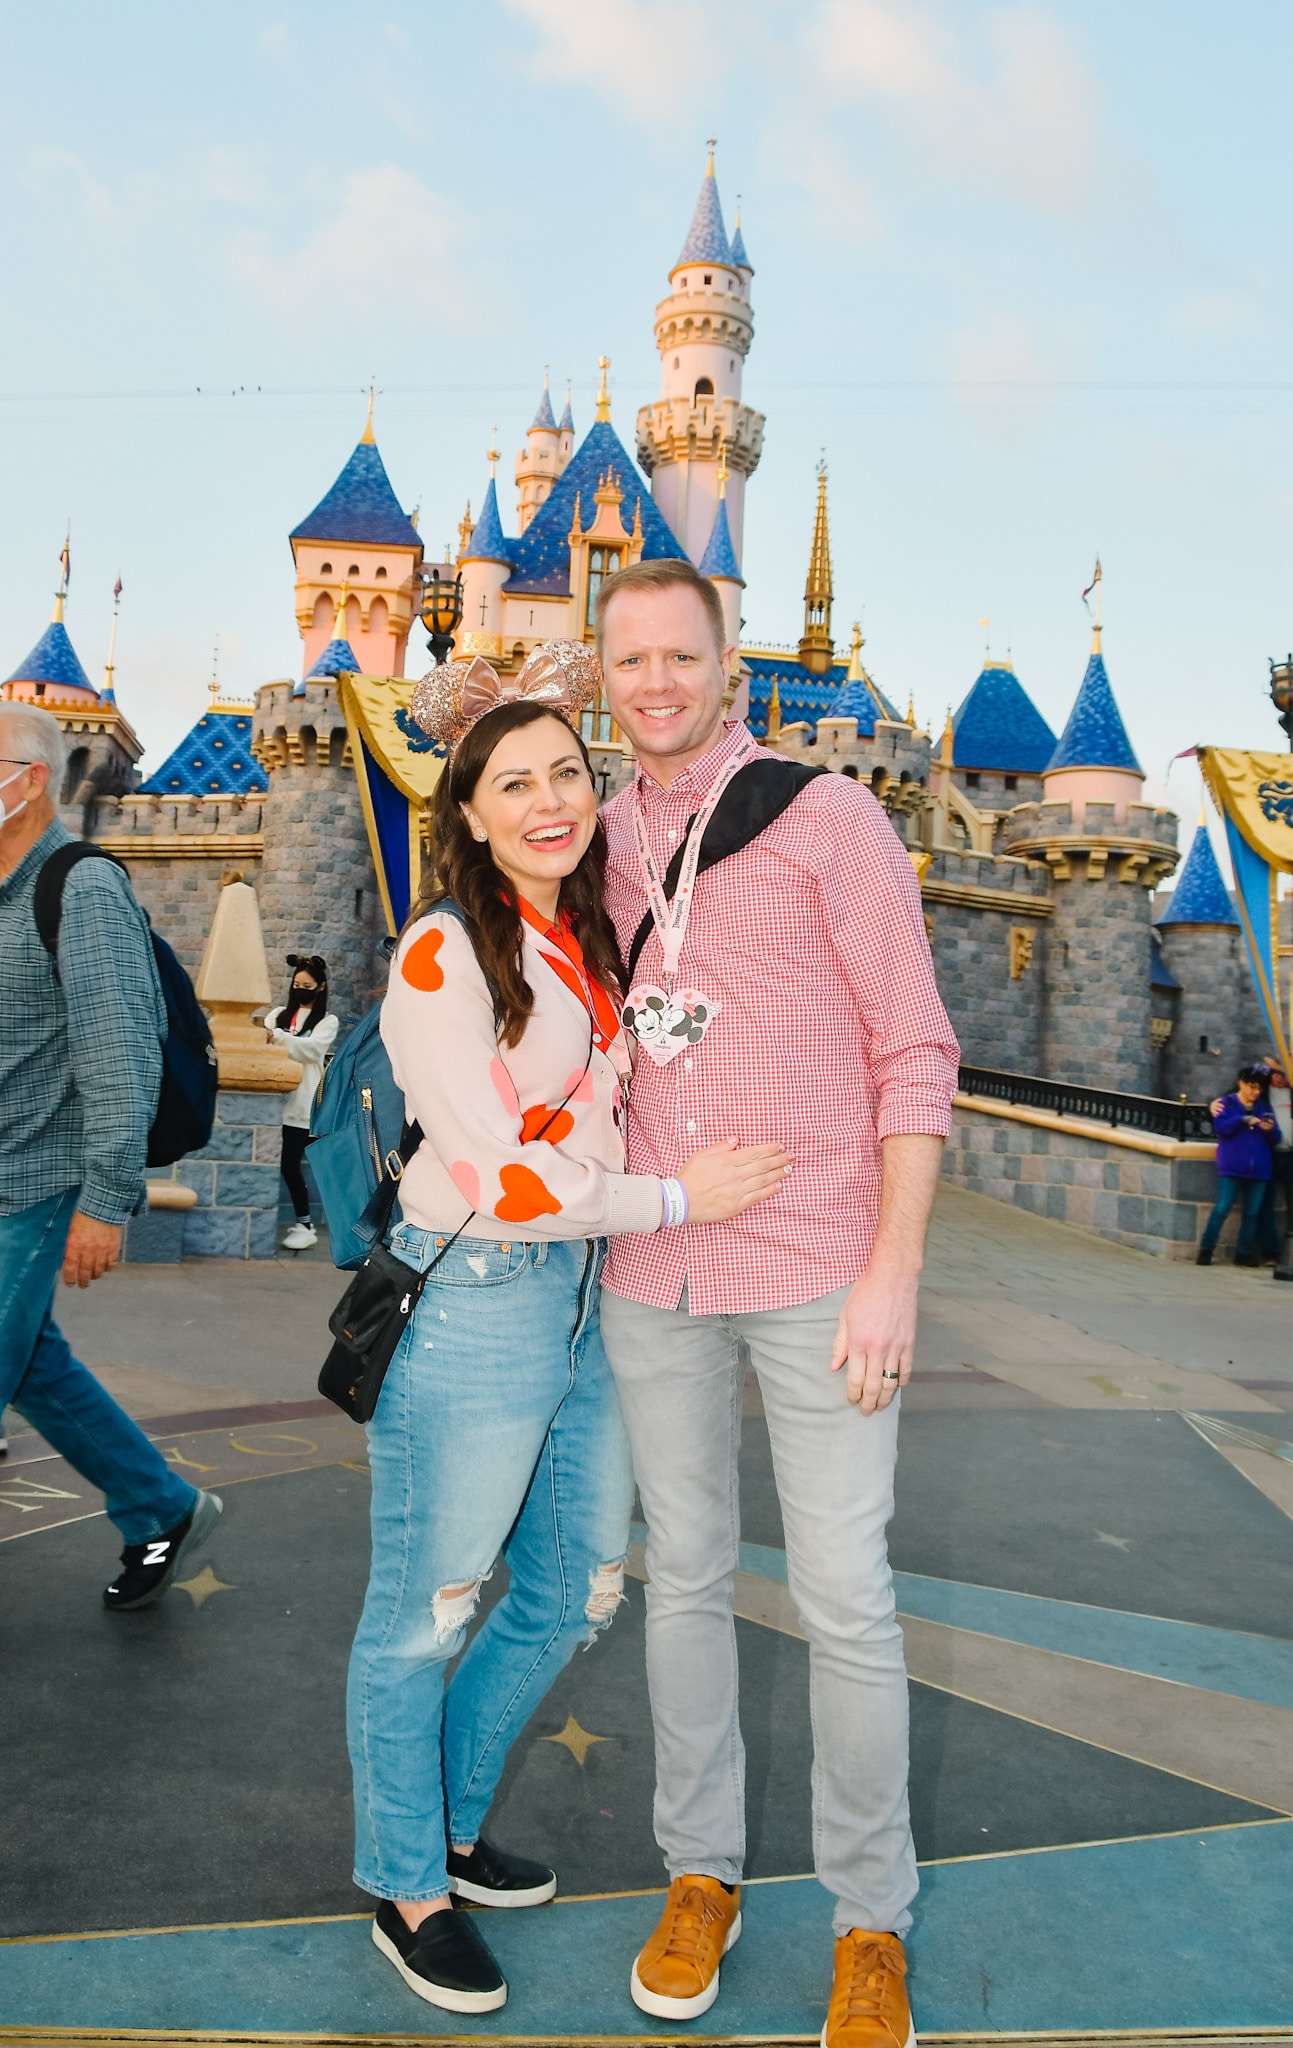 Disneyland Sweethearts’ Nite: What to Expect